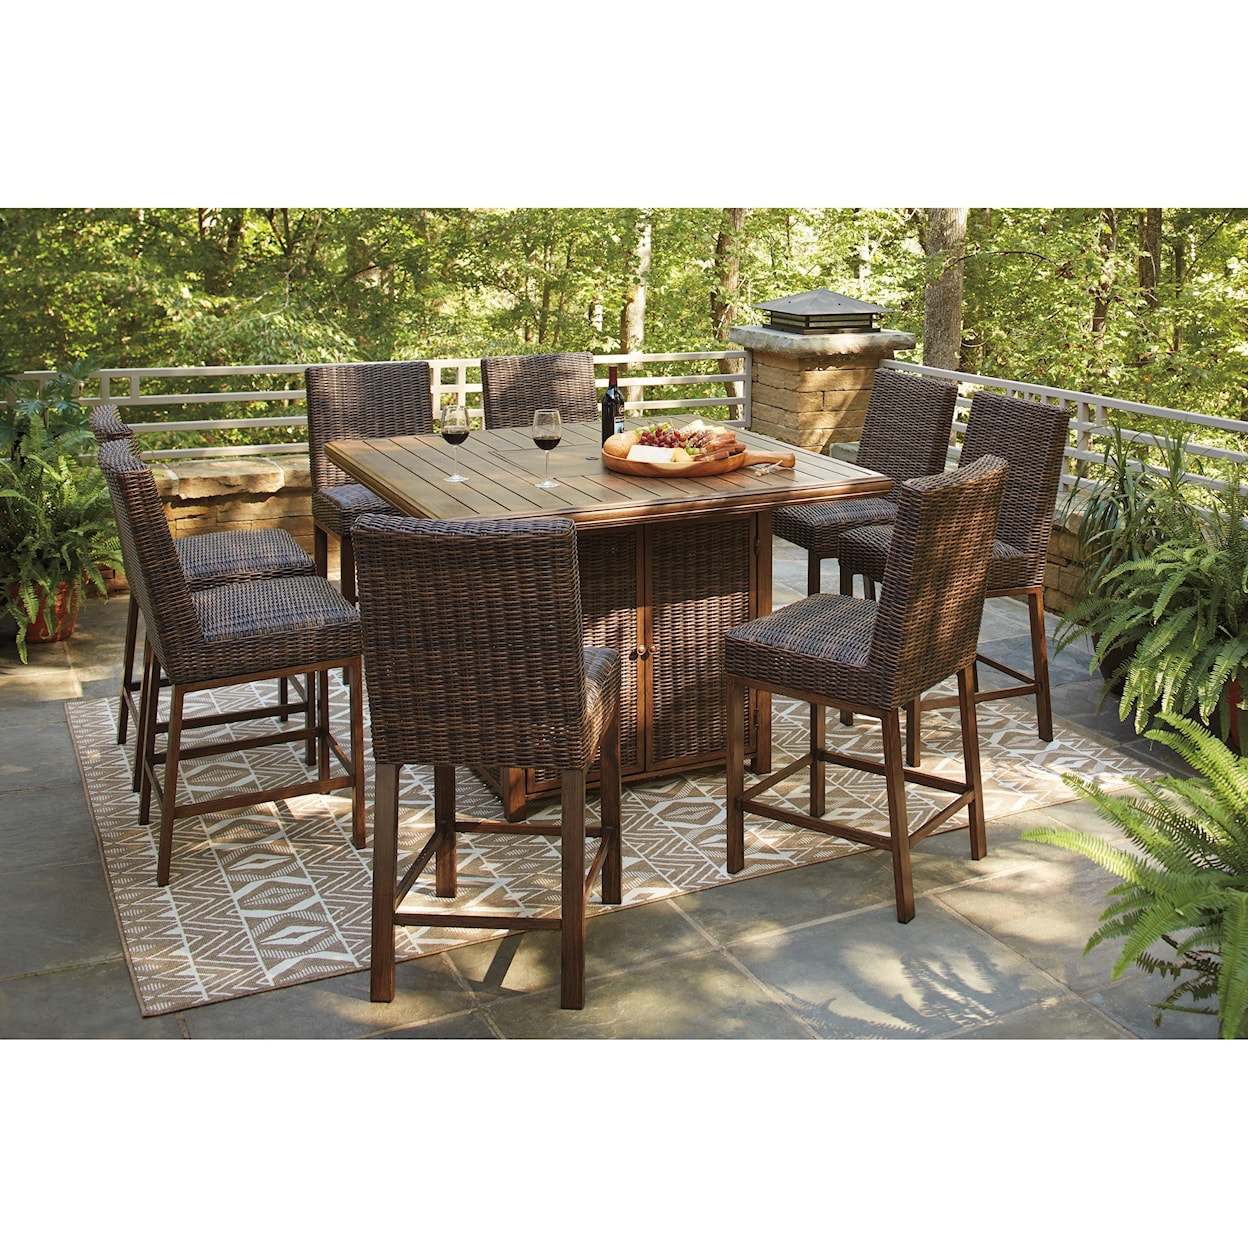 Signature Design by Ashley Paradise Trail 9 Piece Outdoor Firepit Table Set